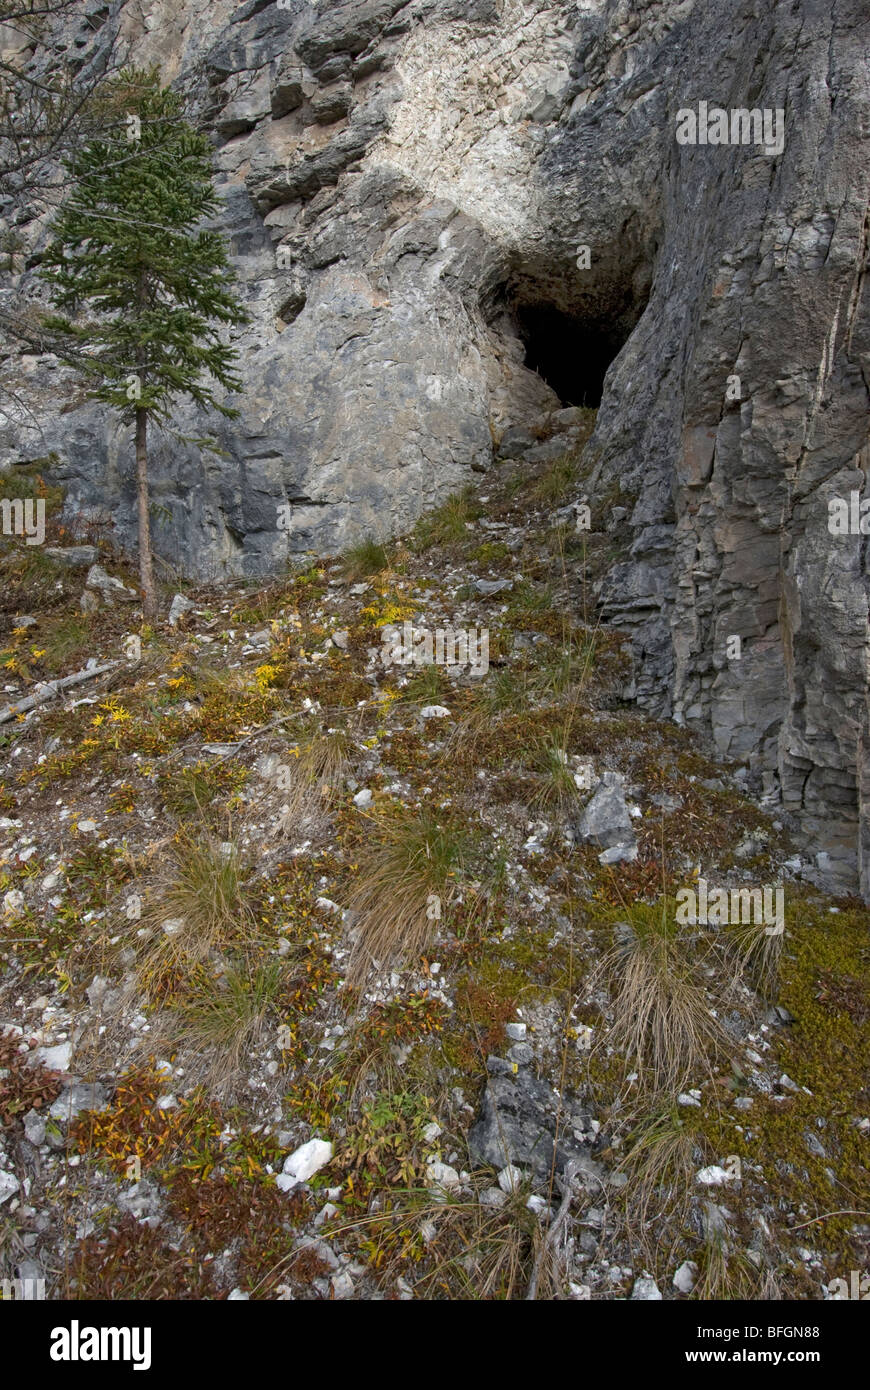 Entrance to grizzly bear den on side of mountain.  Yukon Territory, Canada. Stock Photo